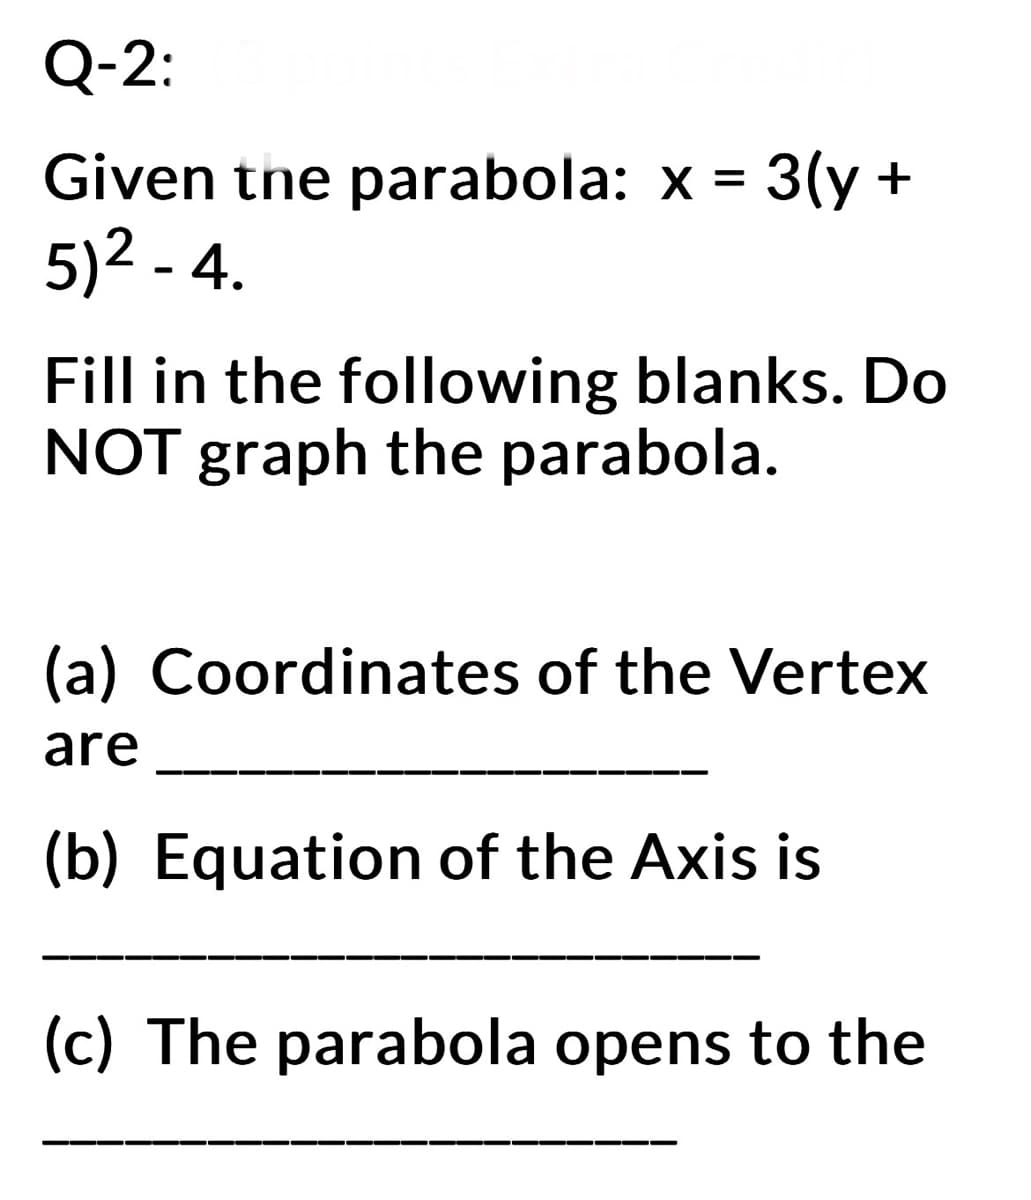 Q-2:
Given the parabola: x = 3(y +
5)² - 4.
Fill in the following blanks. Do
NOT graph the parabola.
(a) Coordinates of the Vertex
are
(b) Equation of the Axis is
(c) The parabola opens to the